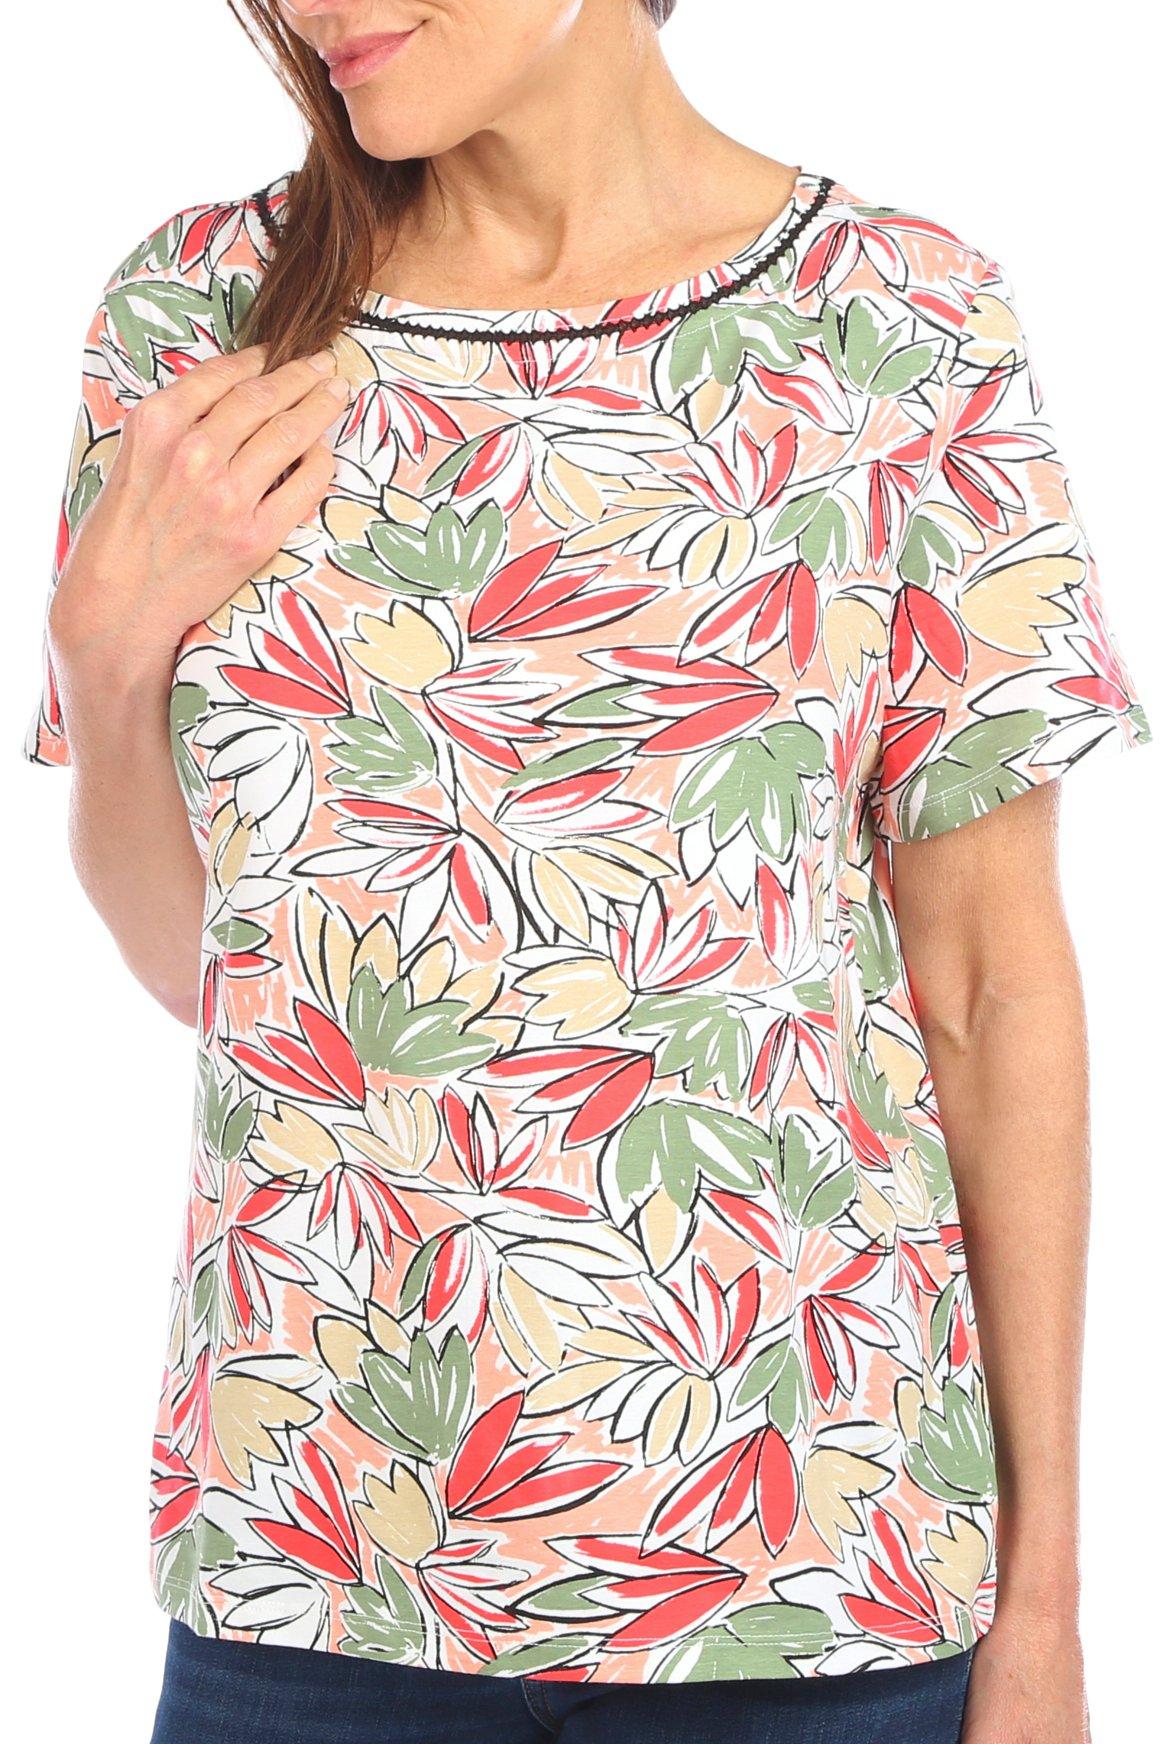 Coral Bay Petite Print Round Neck Short Sleeve Top